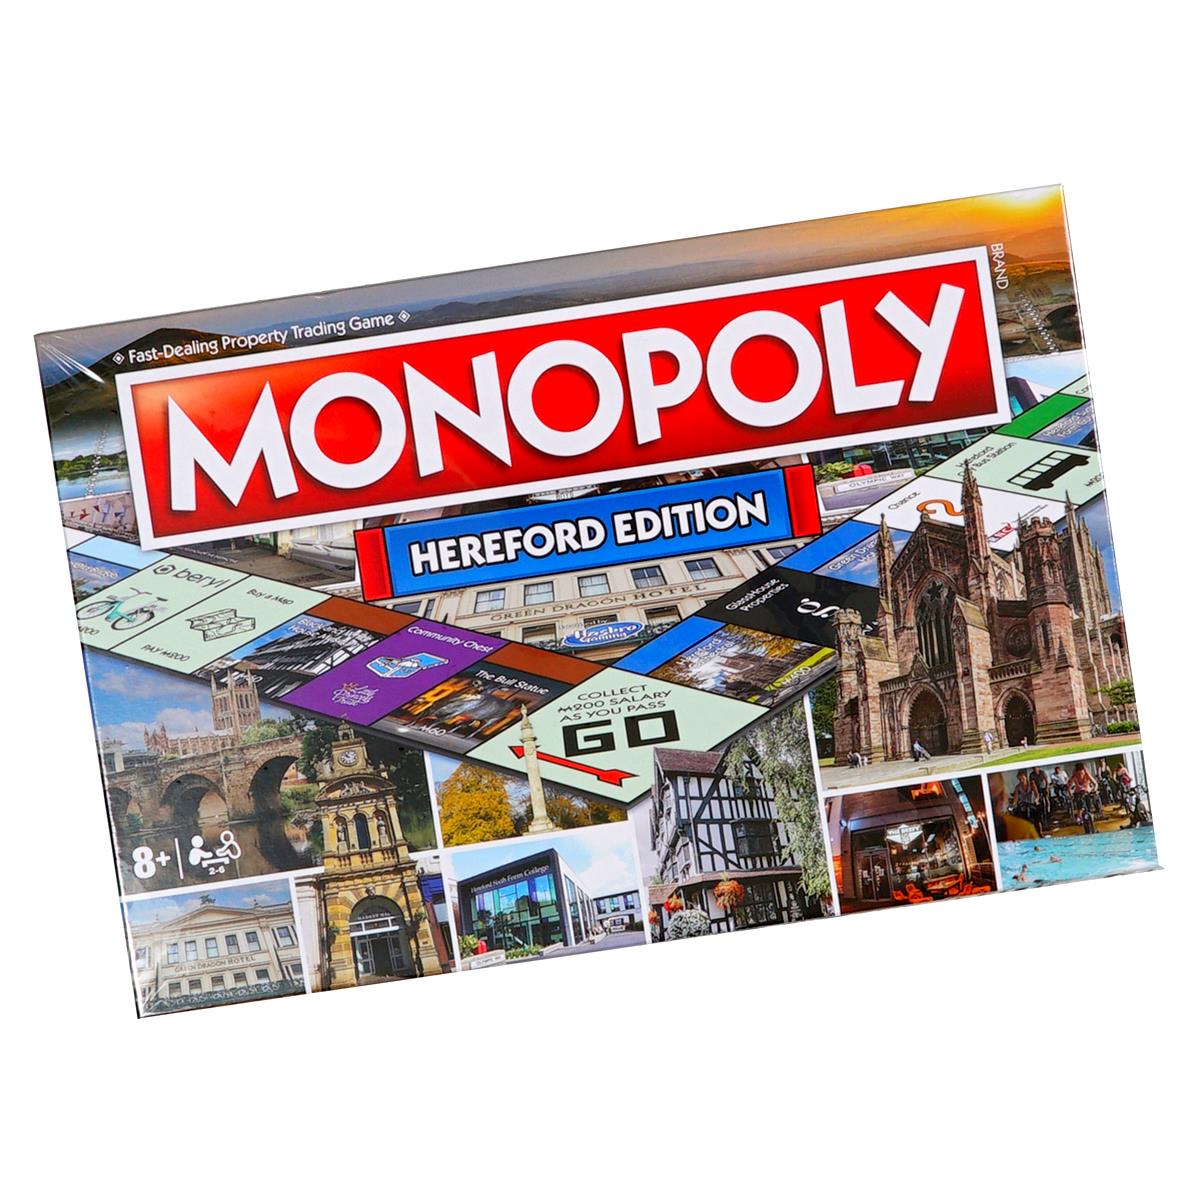 What are the features of the Hereford Monopoly?